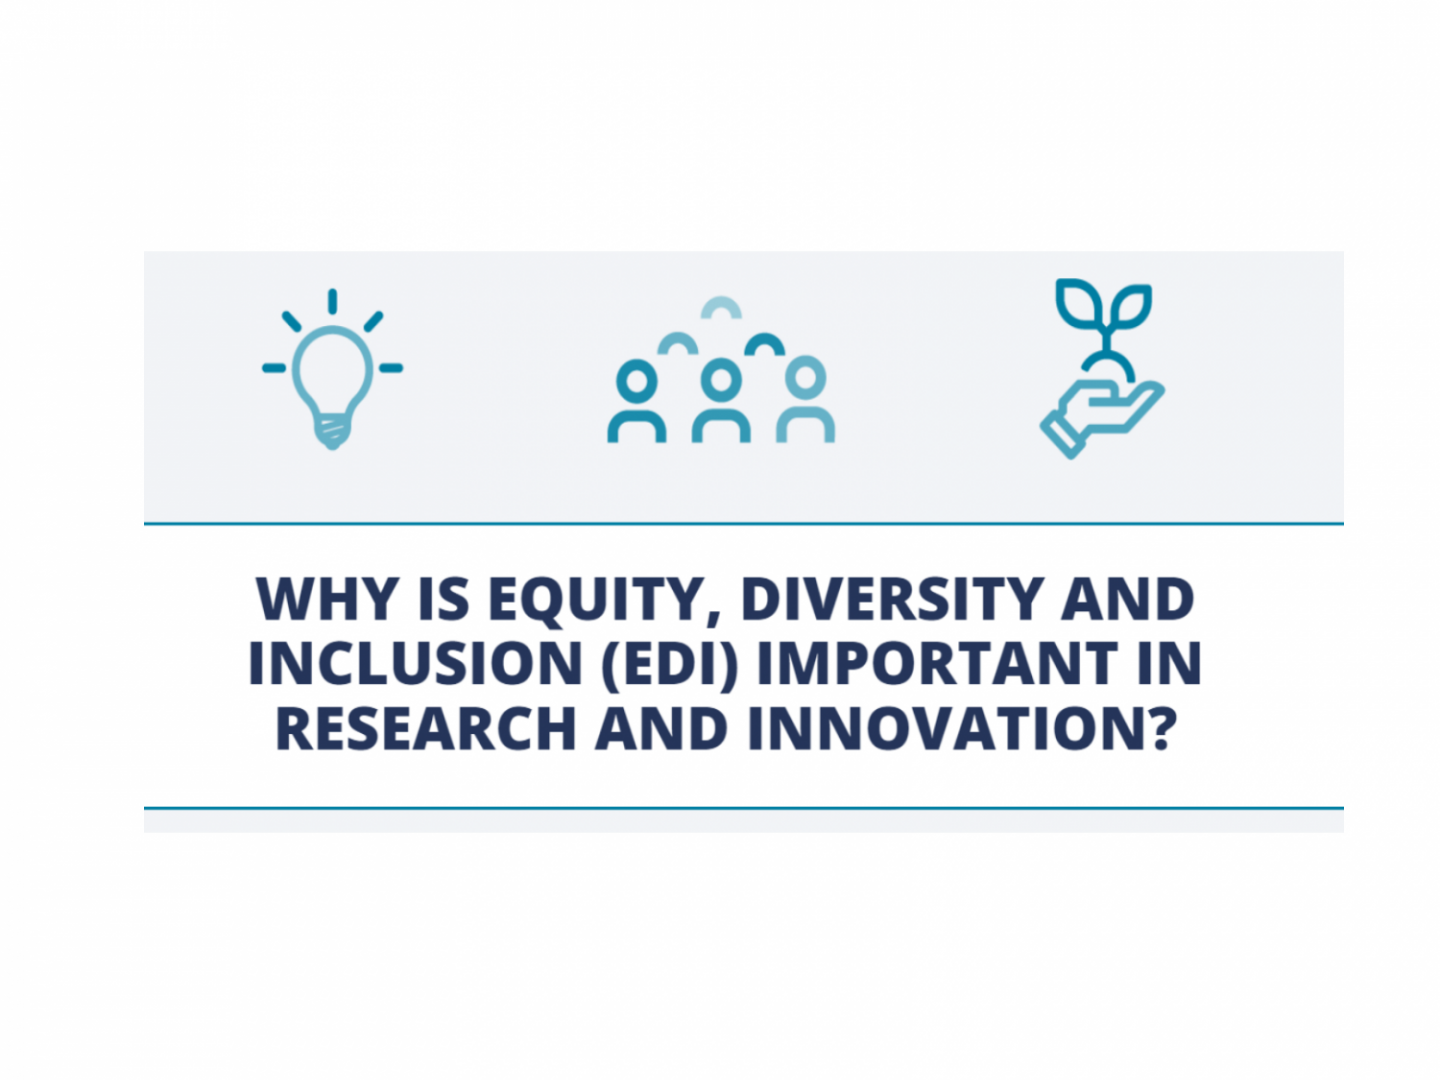 The University of Toronto is committed to inclusion and excellence. Find out more about why EDI is important to research and innovation. 